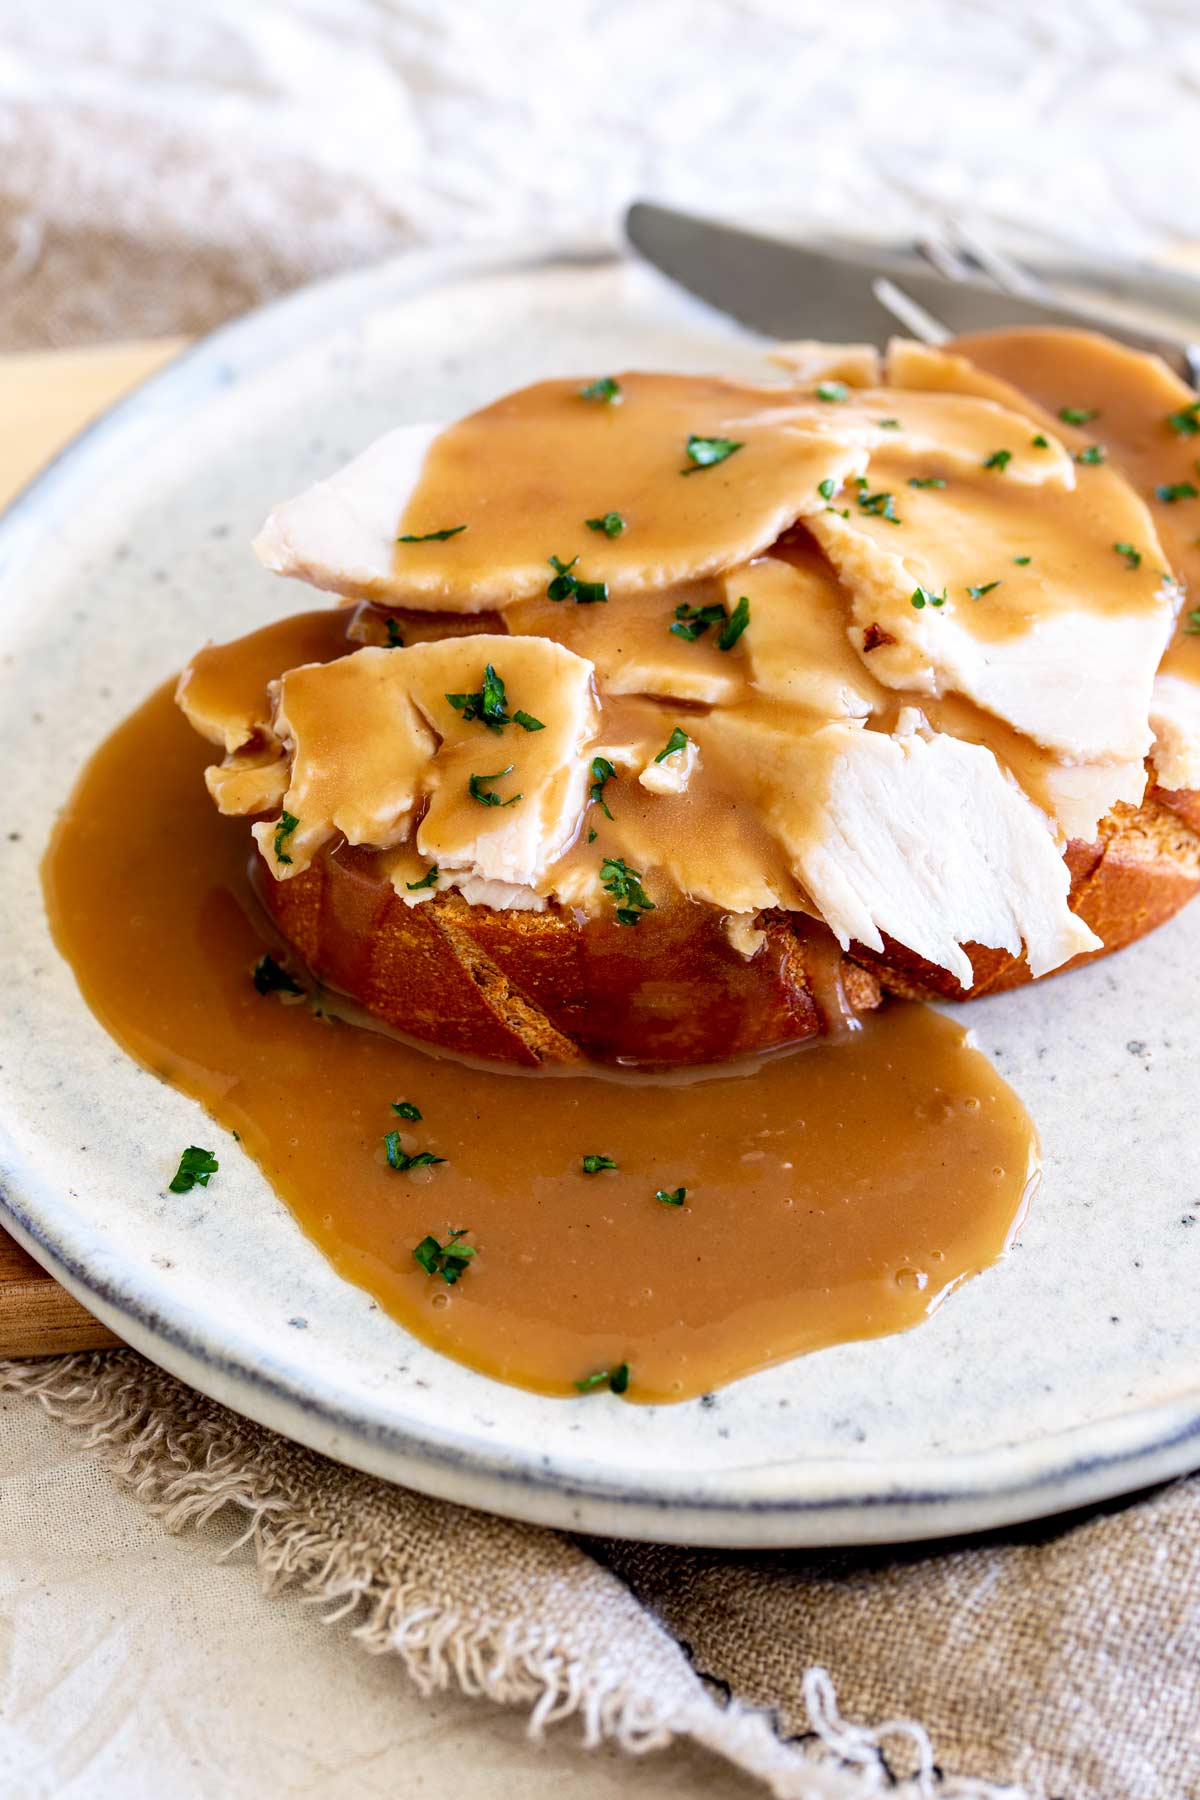 grey plate with a slice of bread, with turkey and gravy on it